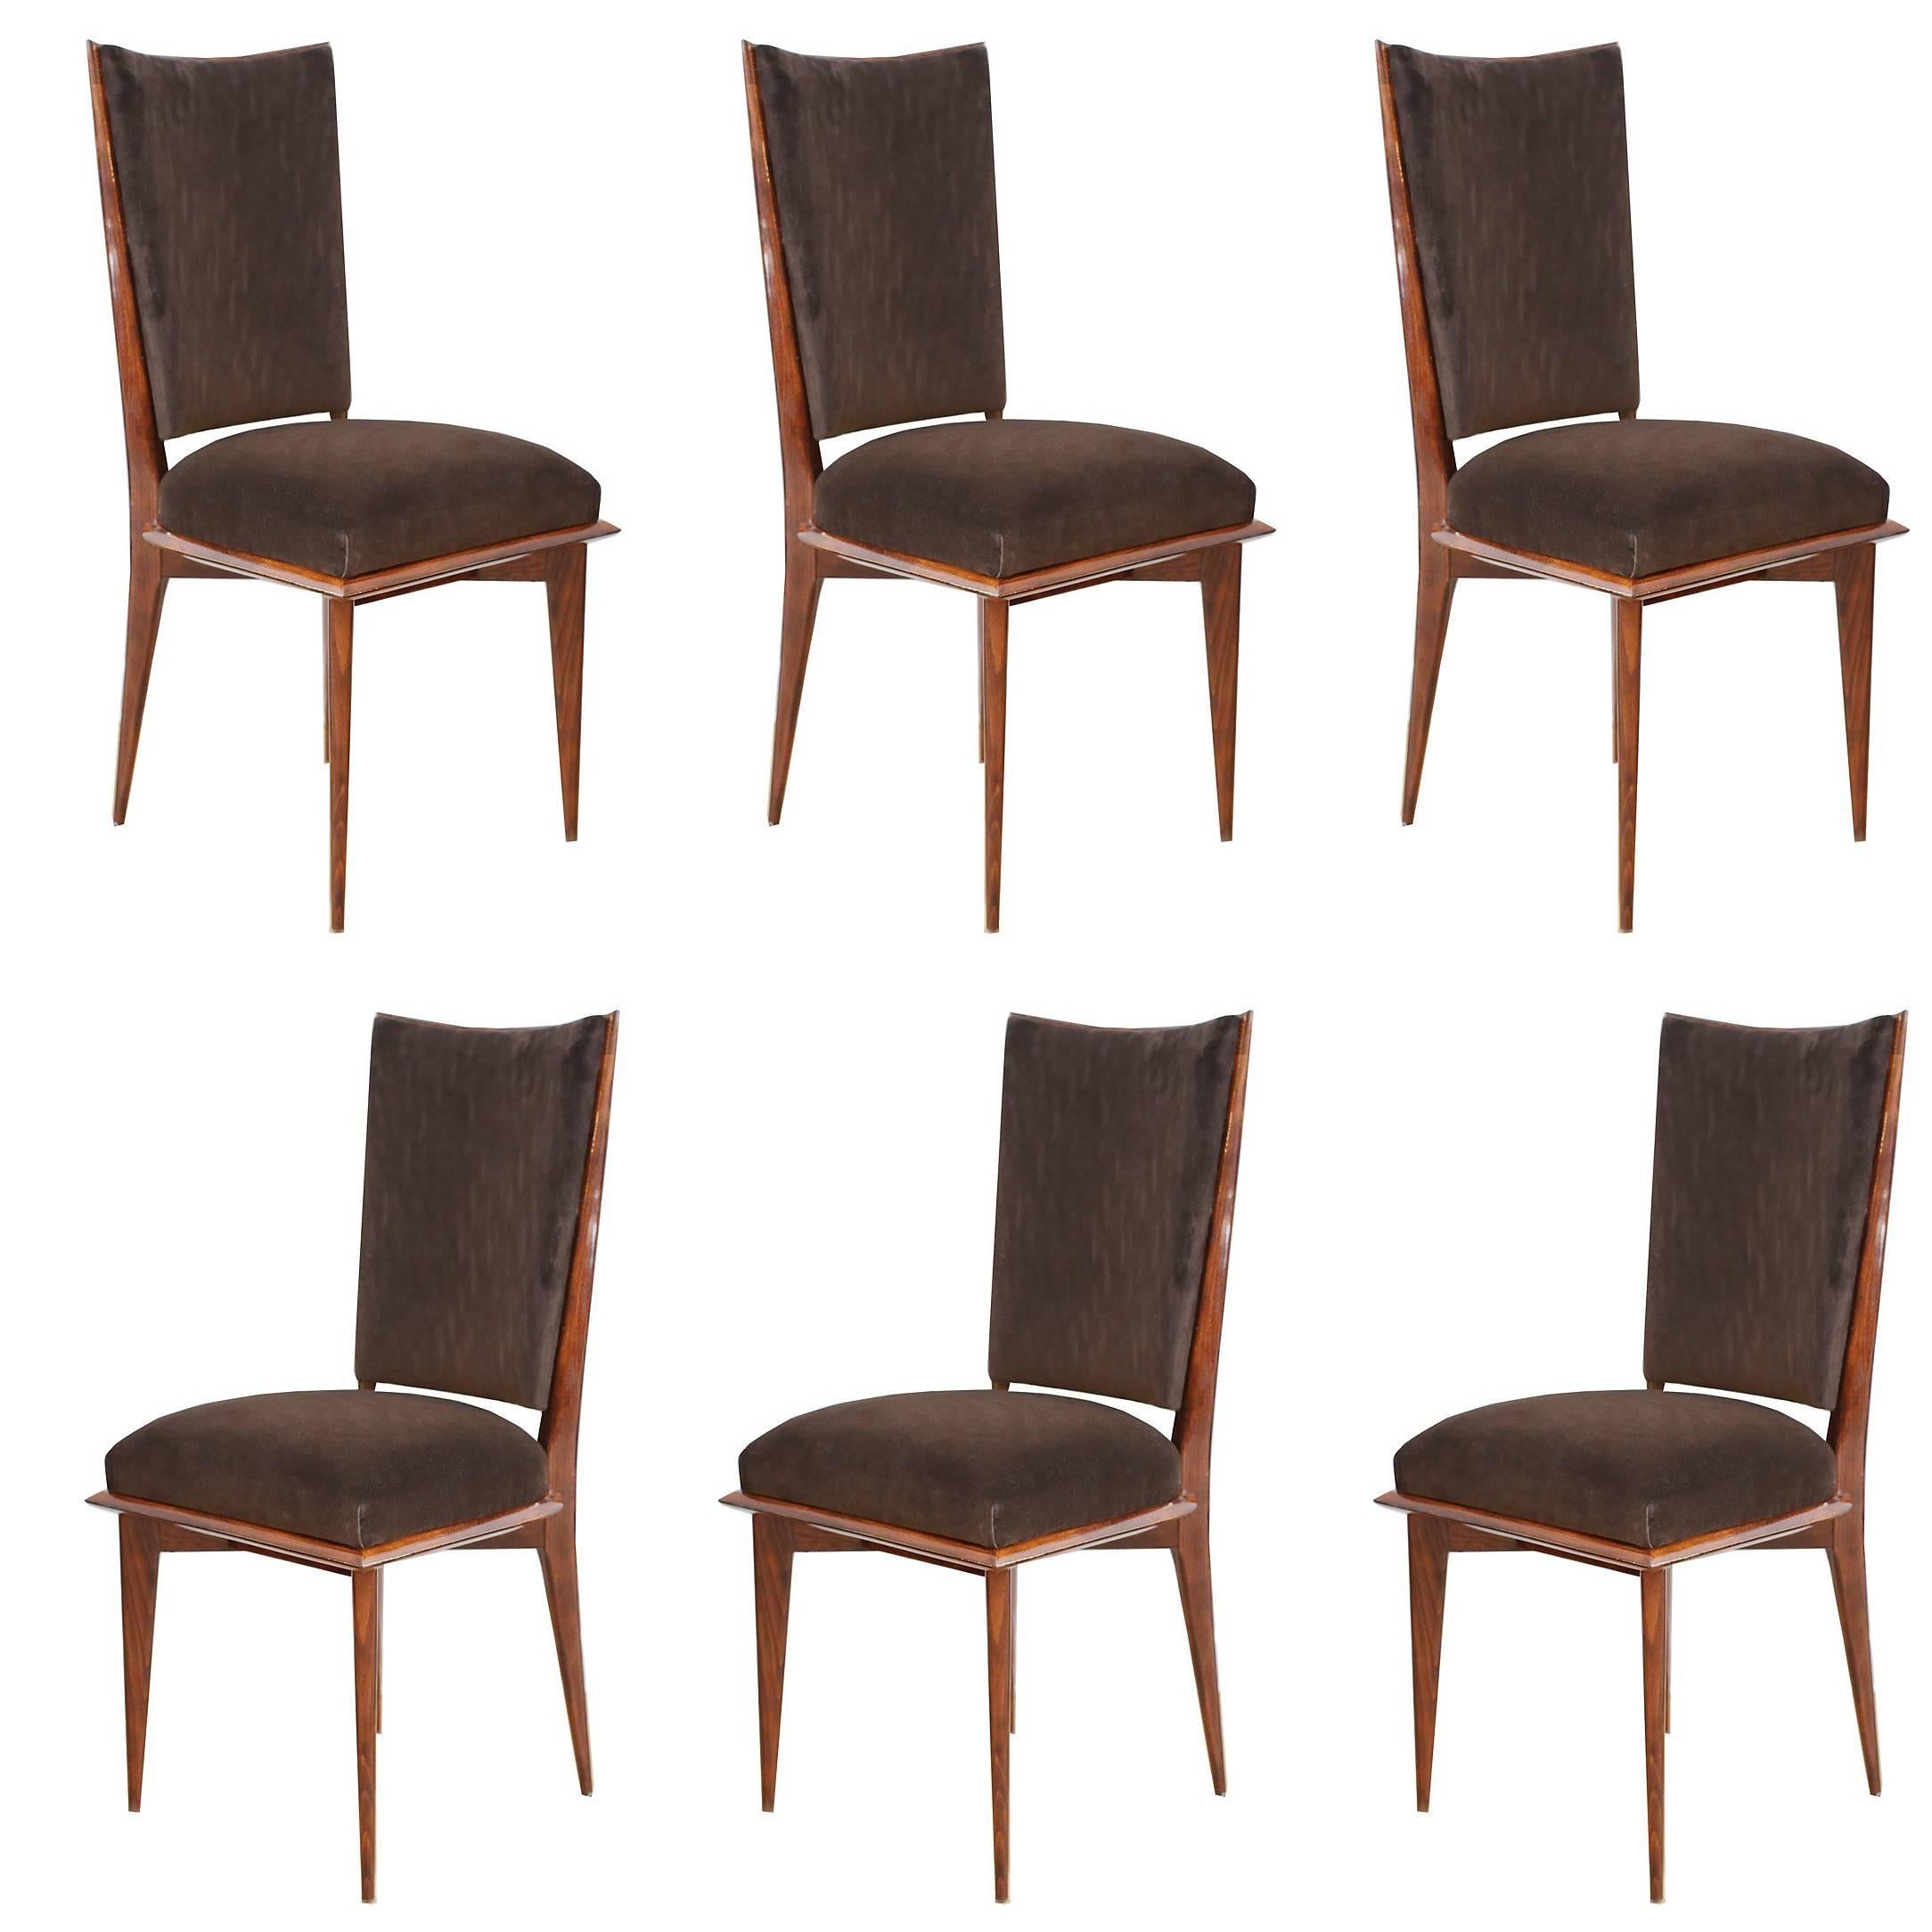 Suite of Six French Art Deco Dining Chairs, circa 1940s